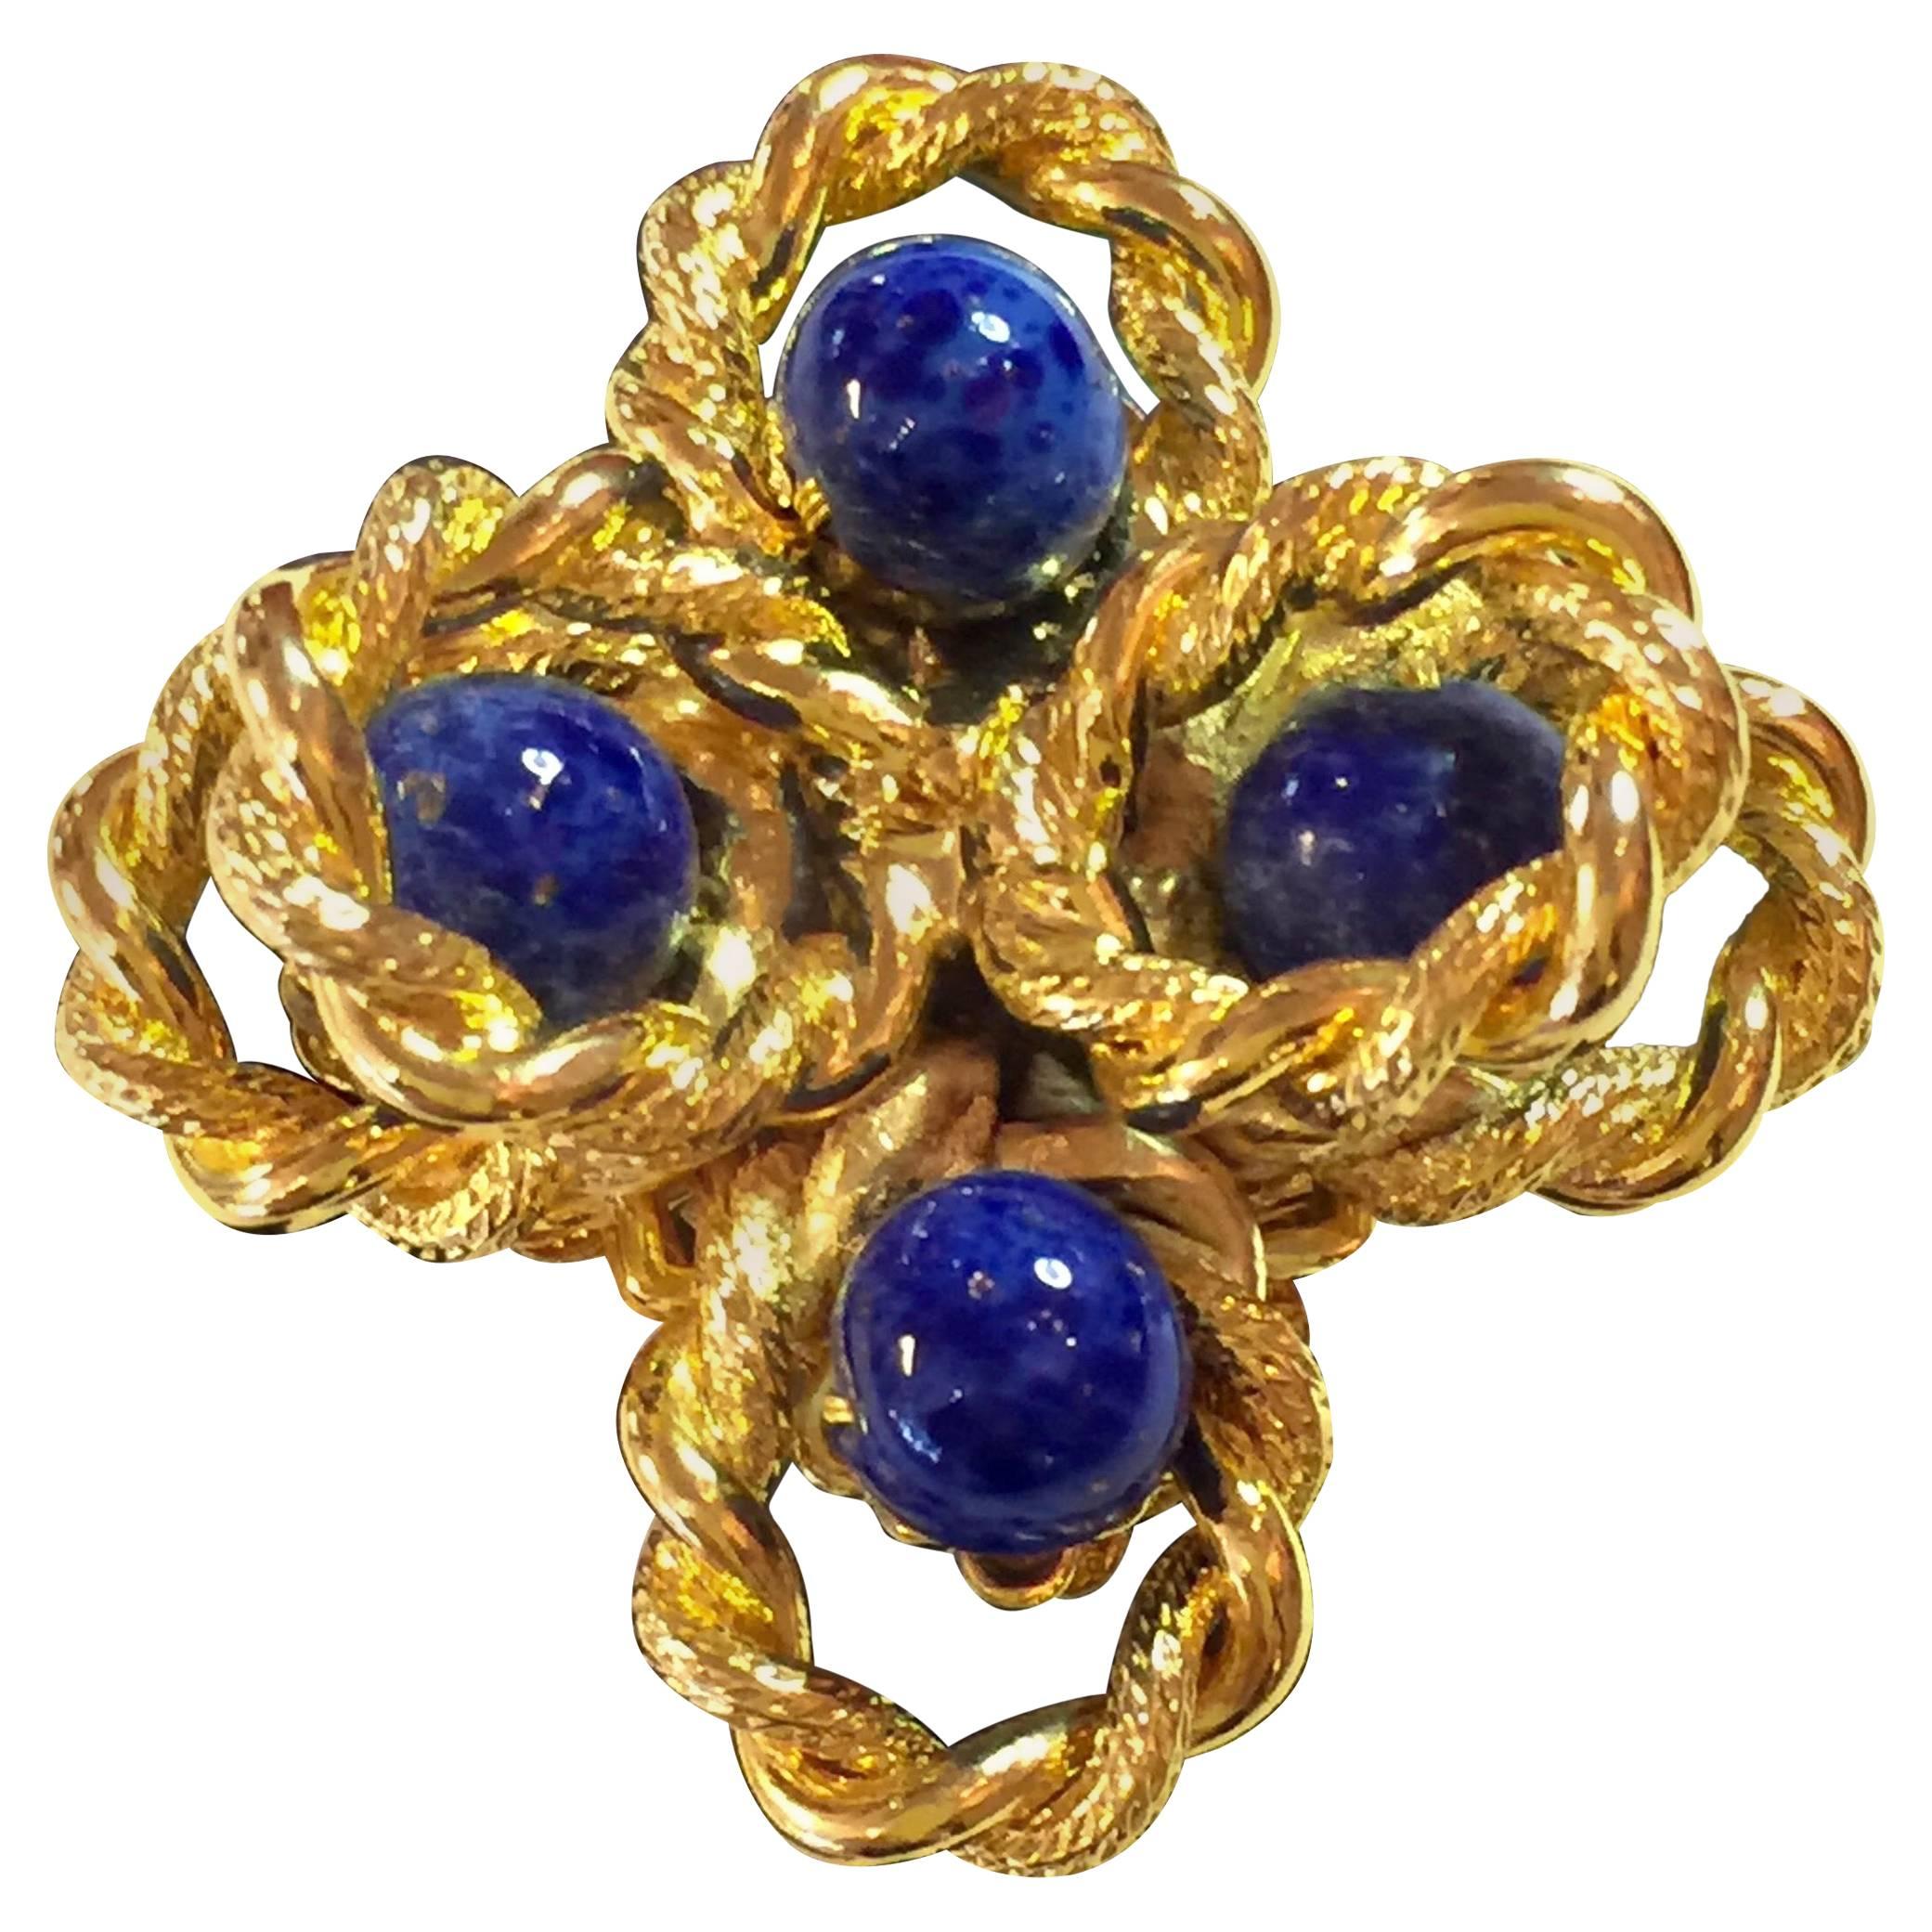 1960's William DeLillo Faux Lapis Goldtone Fits EVERYONE Cocktail Ring